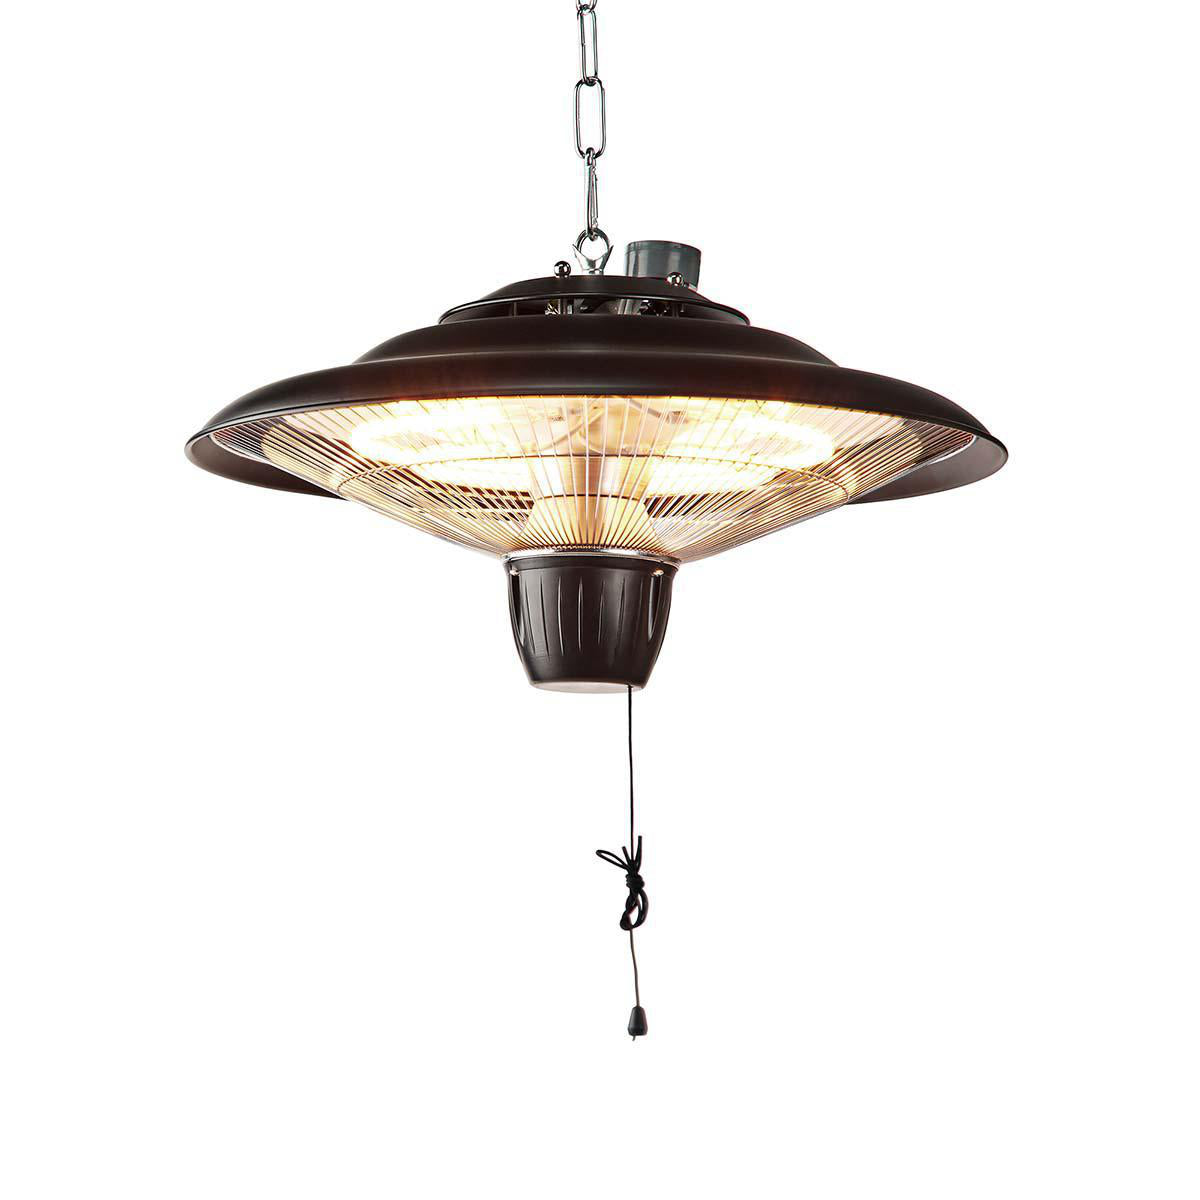 Patio Heater | With Ceiling Mounting | 2000 W | IP24